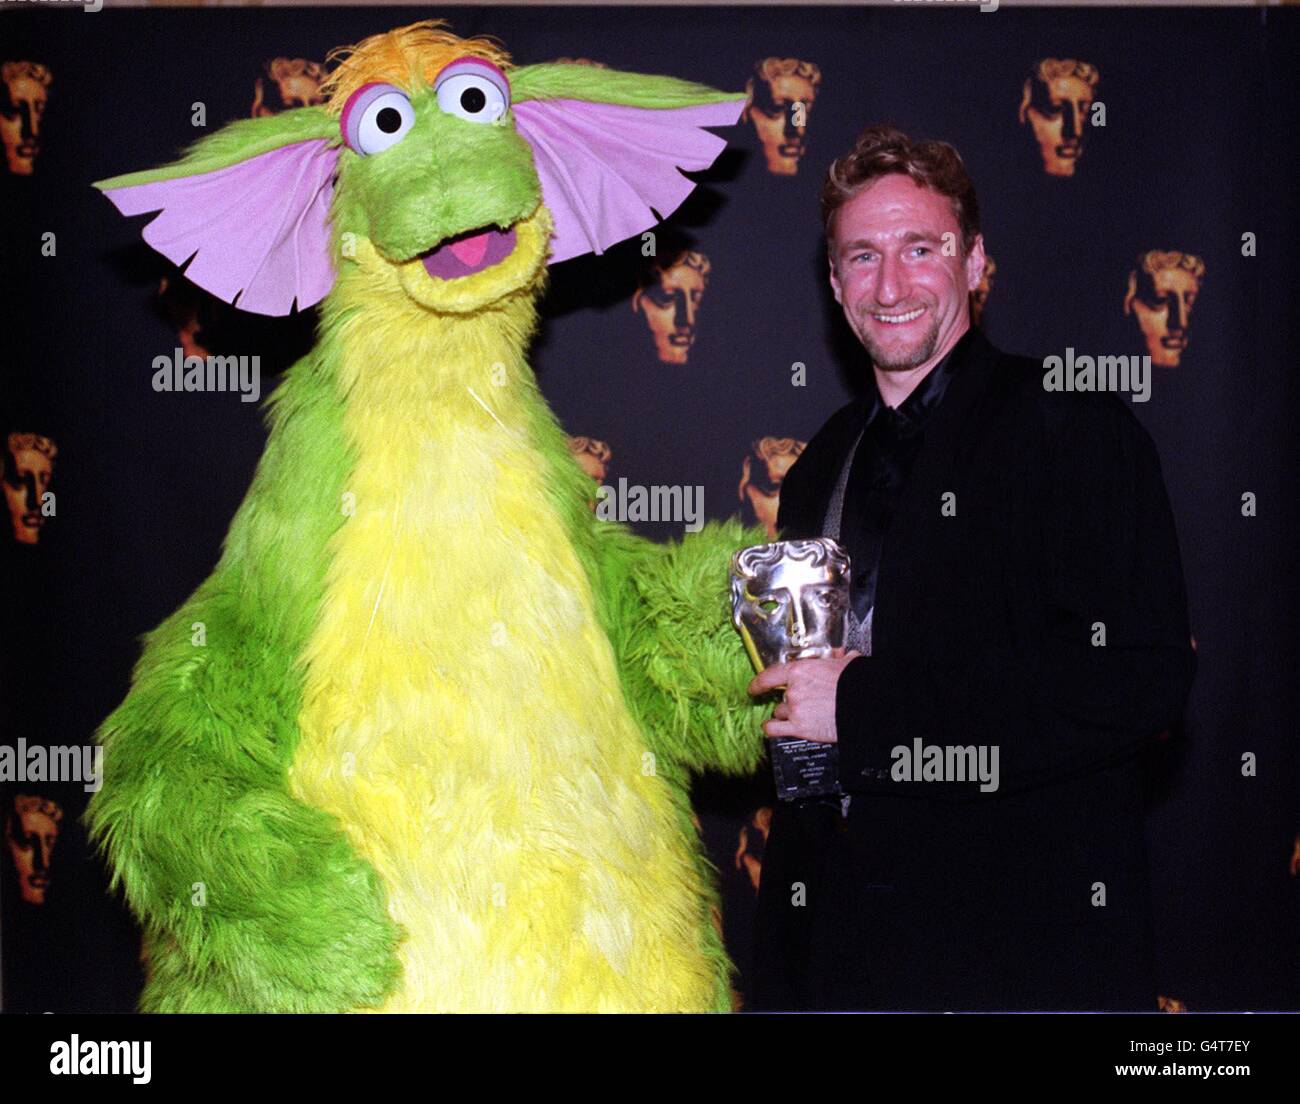 Brian Henson, boss of The Jim Henson Company, the creators of The Muppets receives 'The Special Award' for outstanding long term contribution to children's television and film during the 4th British Academy Children's Awards in London. Stock Photo